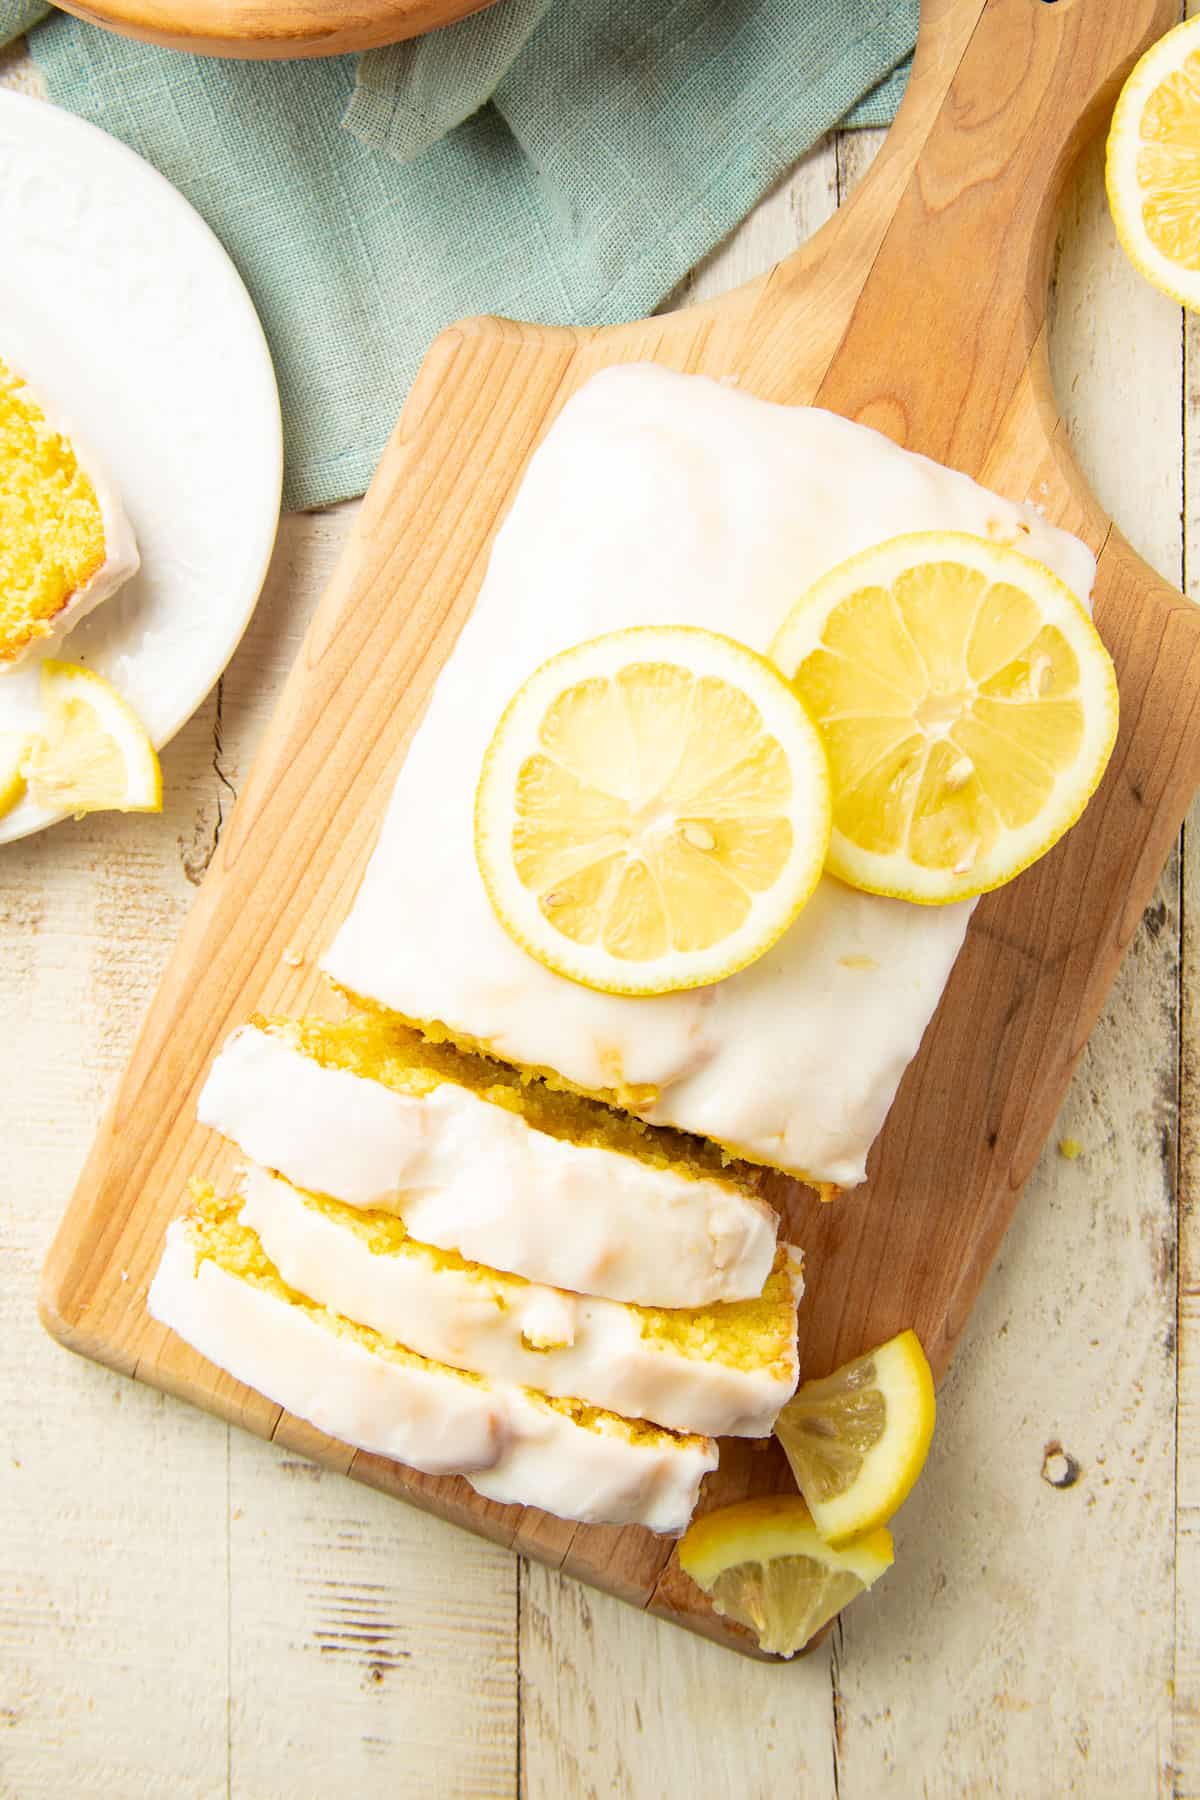 White wooden surface set with blue napkin, lemon slices, and Vegan Lemon Loaf on a cutting board.